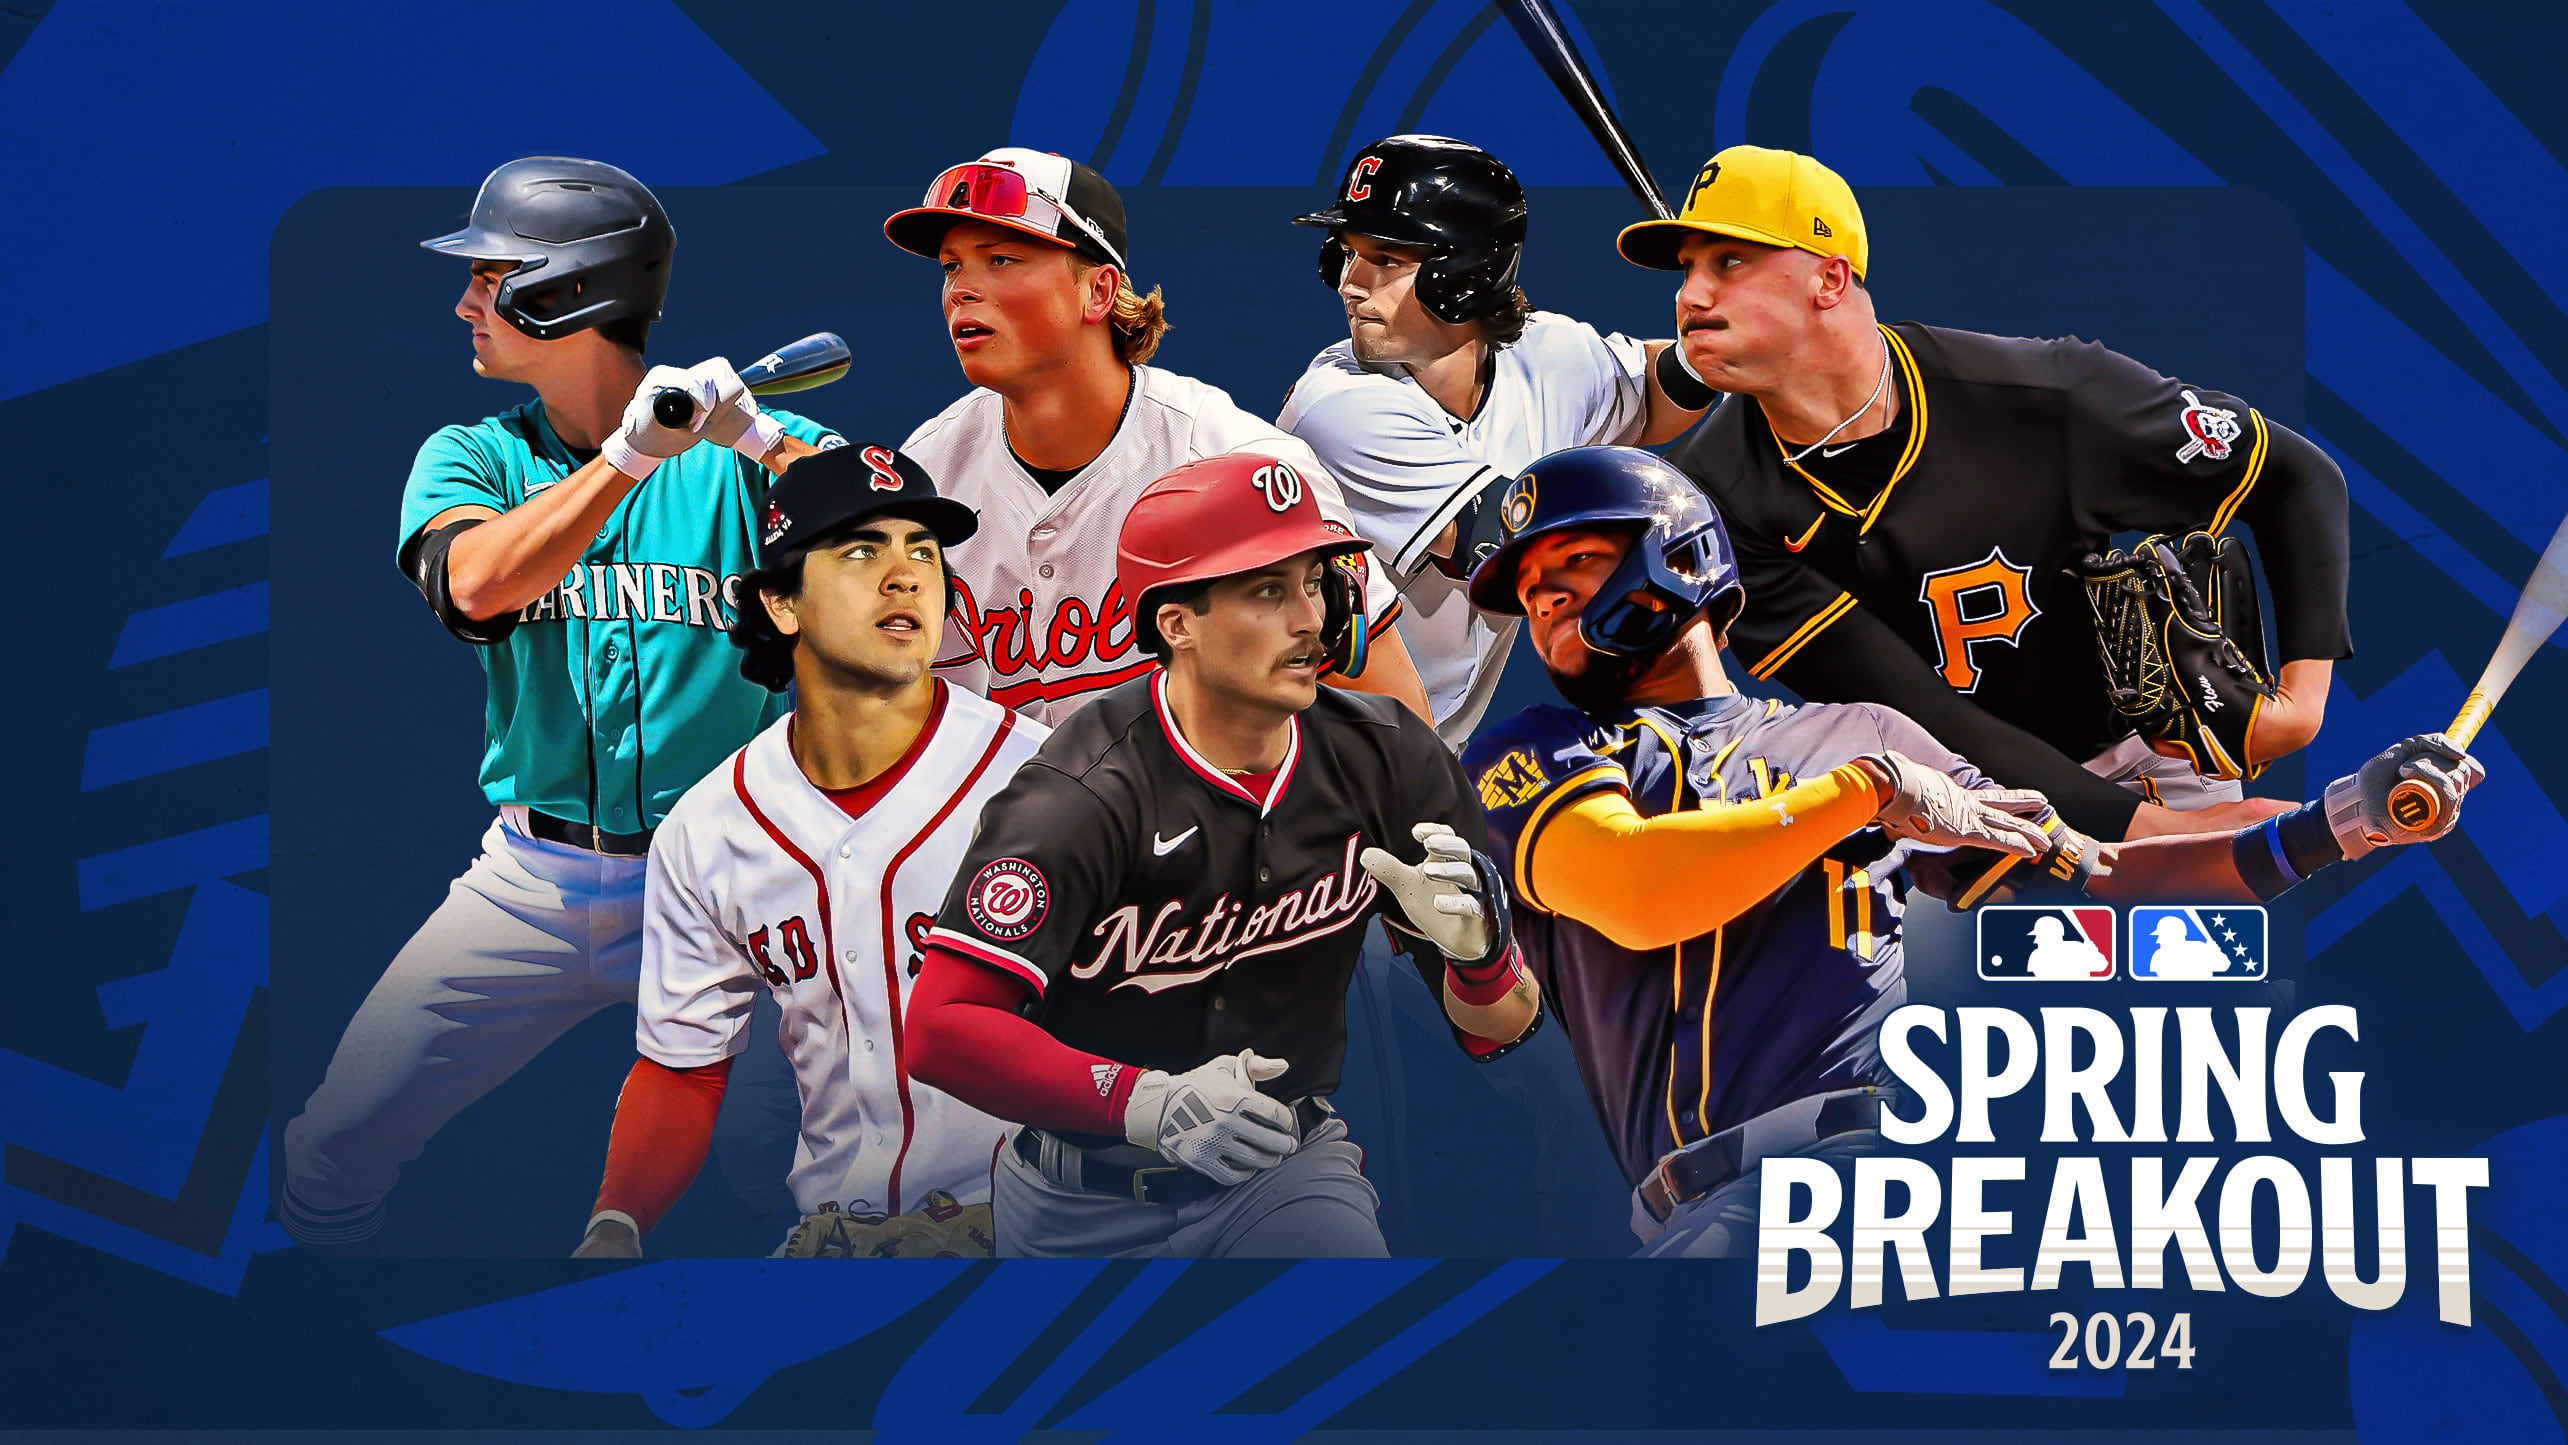 All the top prospects on Spring Breakout rosters